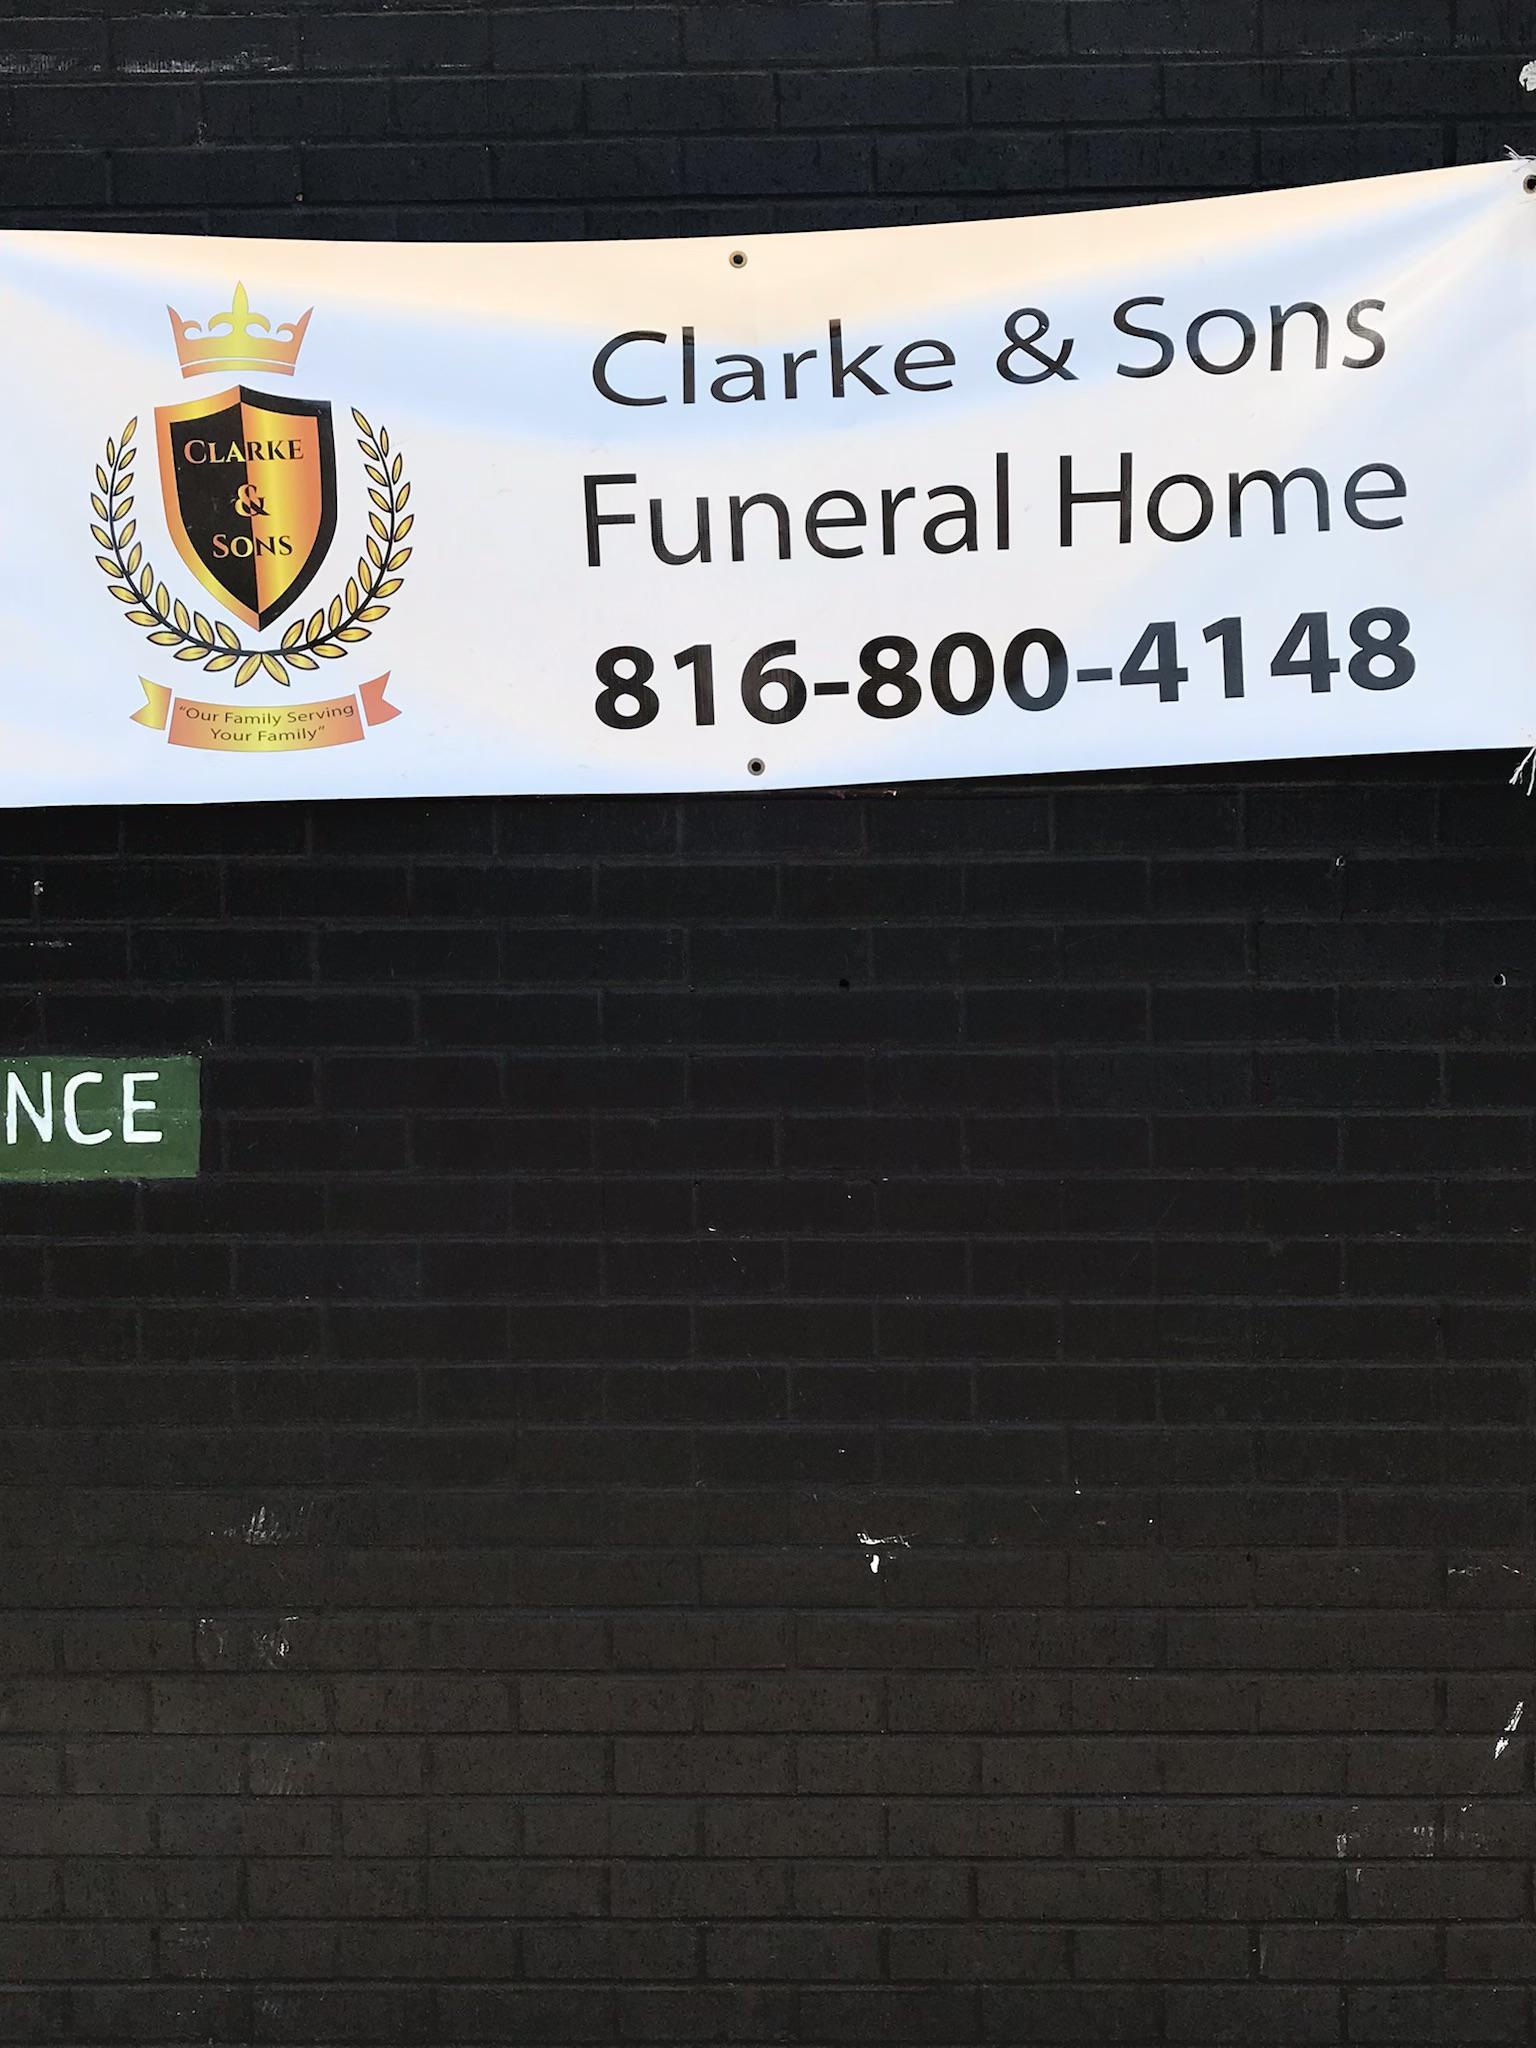 Clarke and Sons Funeral Home, LLC